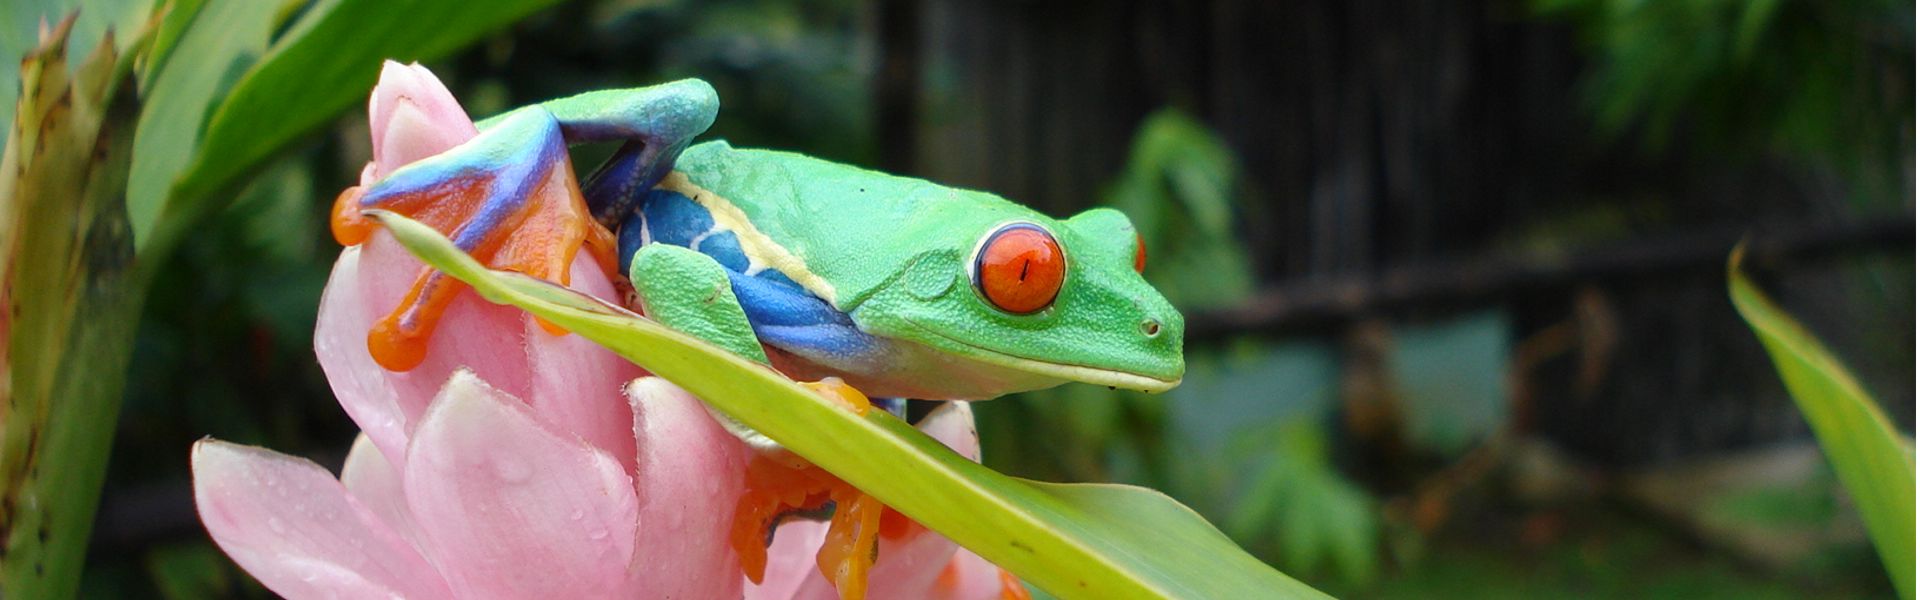 Costa Rica tree frog shows off brilliant colors on a ginger flower